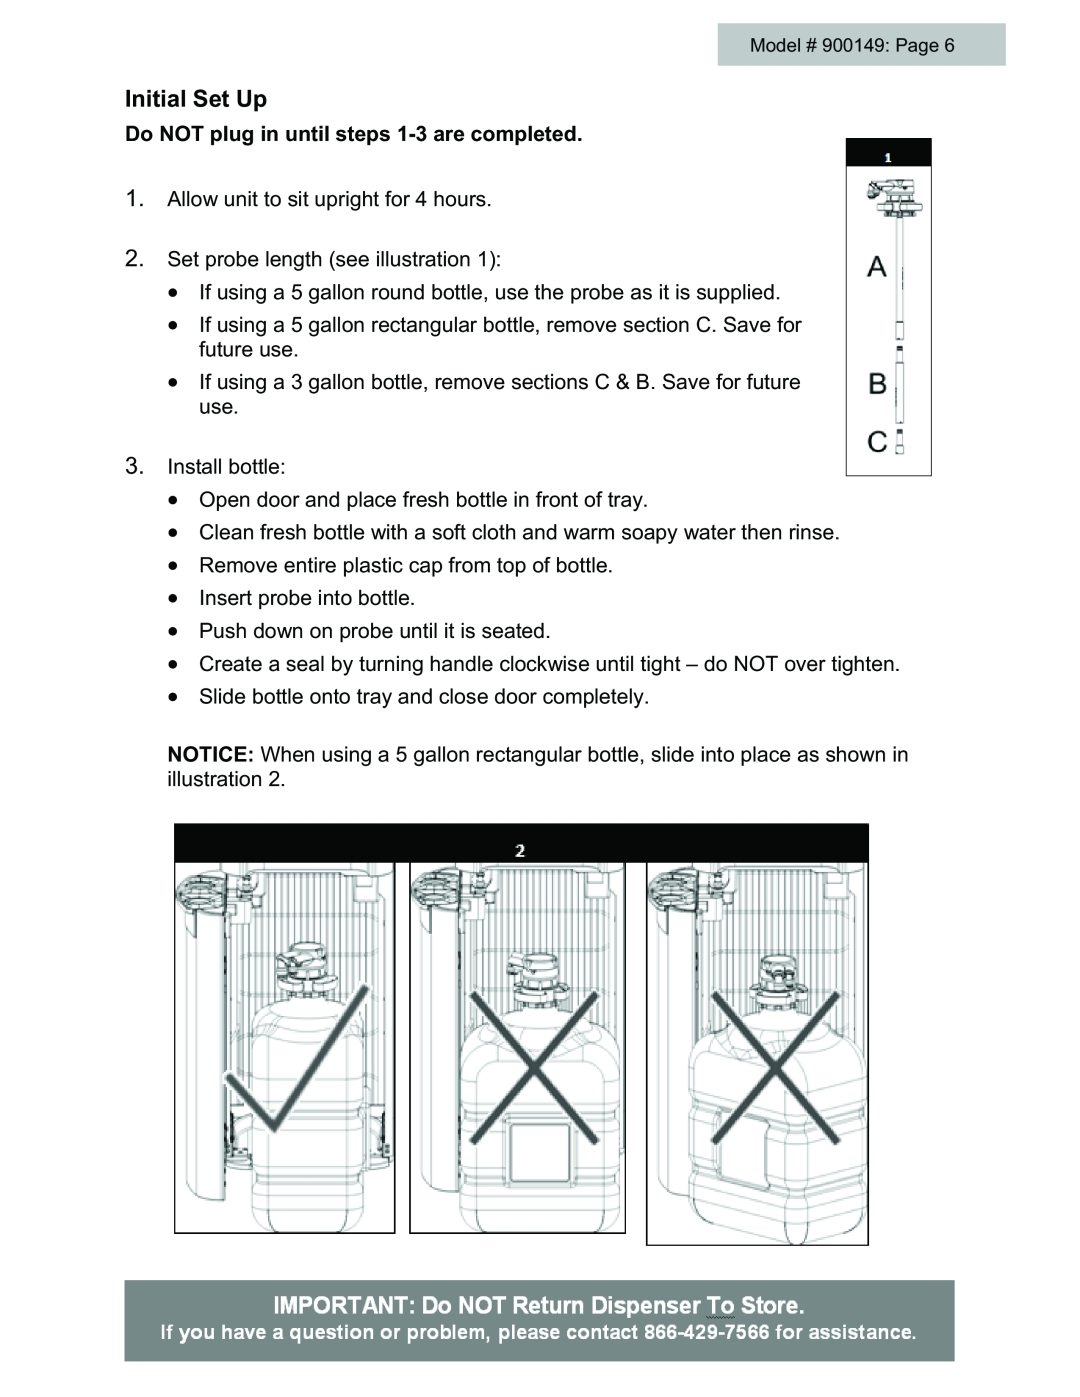 Black & Decker # 900149 user manual Initial Set Up, Do NOT plug in until steps 1-3are completed 